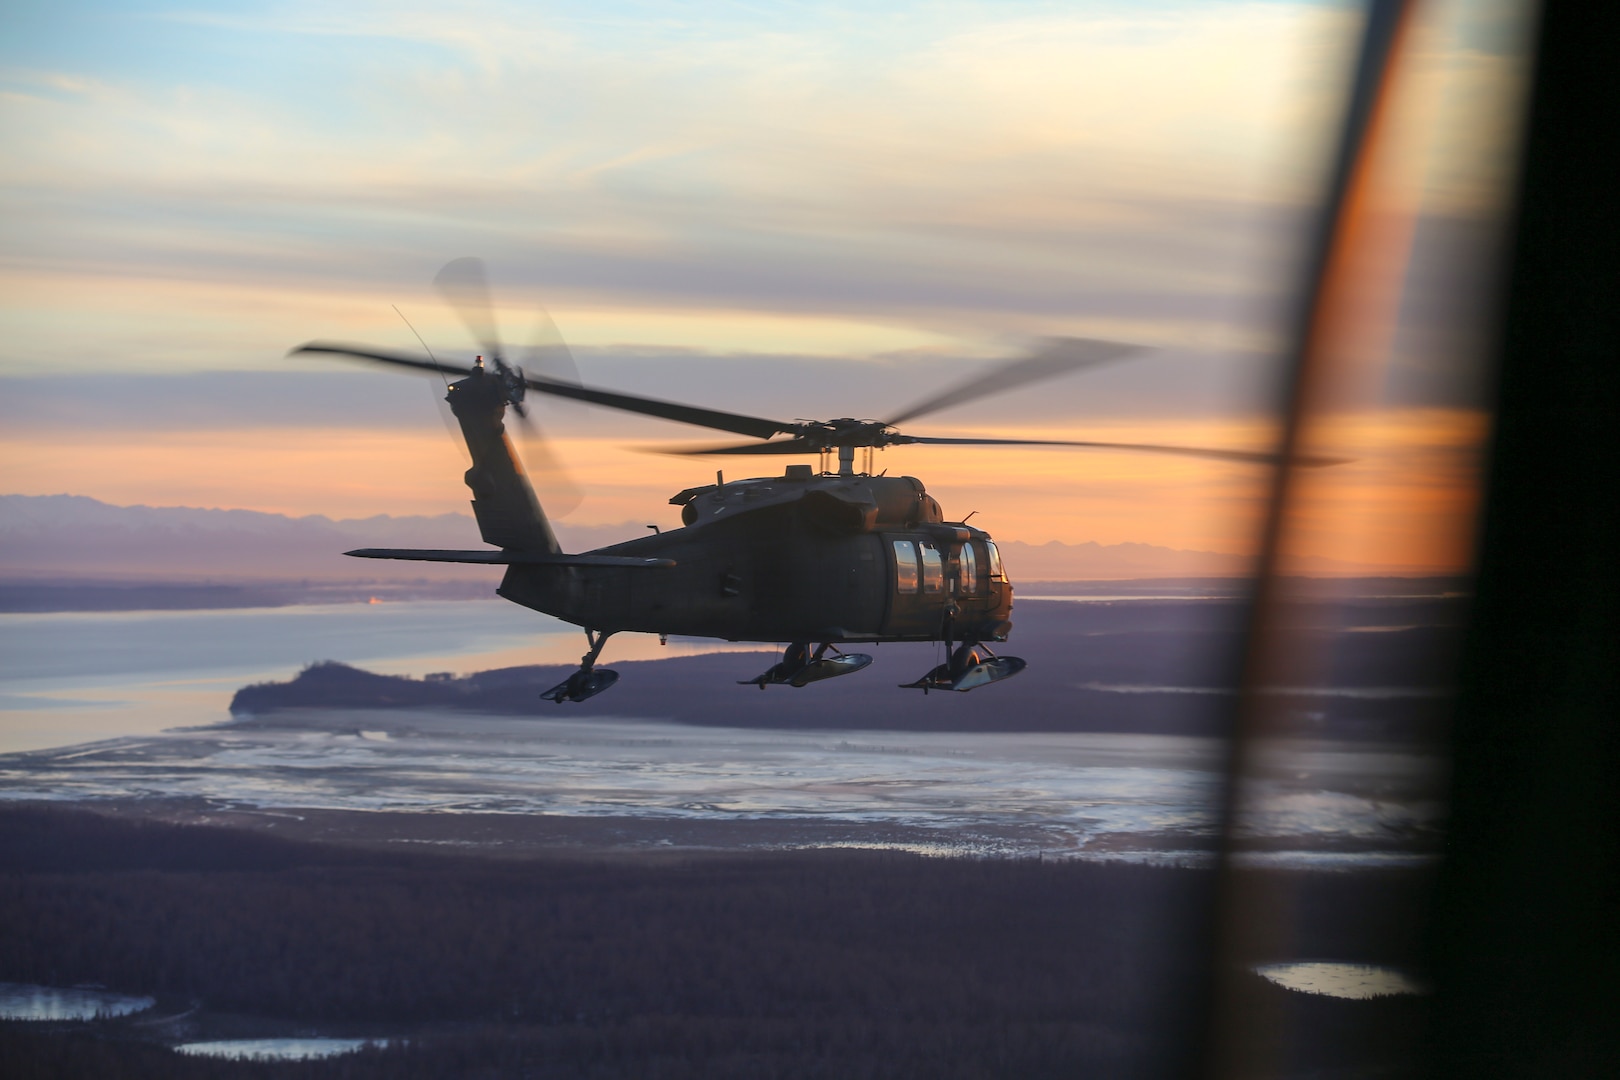 File photo of Alaska Army National Guardsmen from 1st Battalion, 207th Aviation Regiment, conducting an aerial site survey via a UH-60 Black Hawk helicopter Dec. 3, 2018.